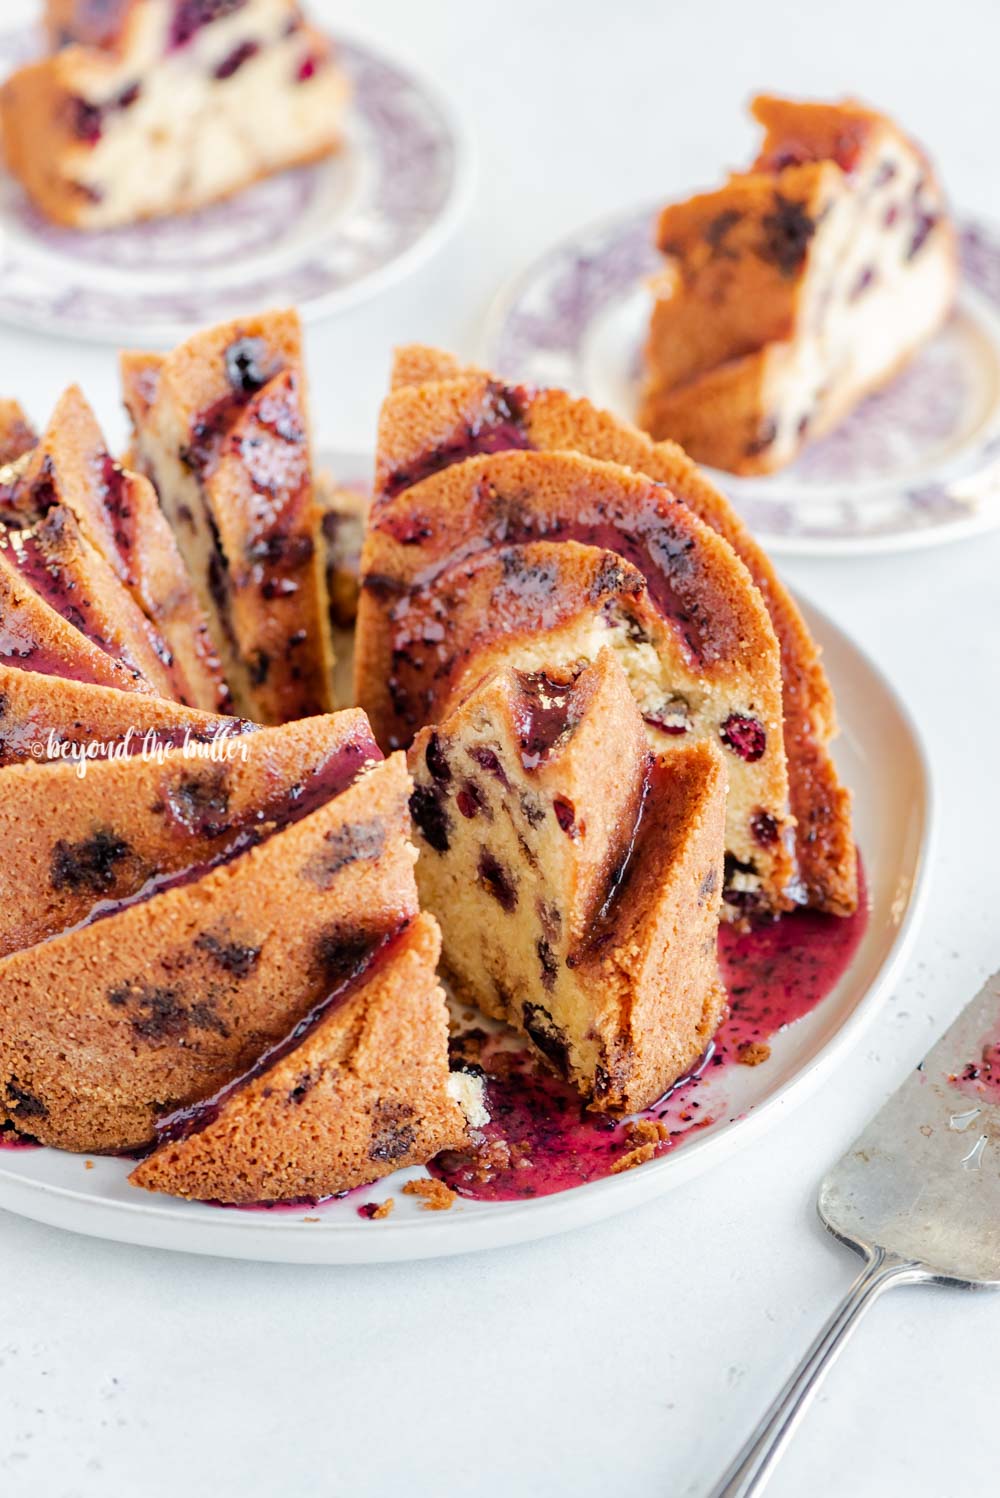 Angled image of sliced blueberry bundt cake with blueberry glaze drizzled over the top | All Images © Beyond the Butter, LLC